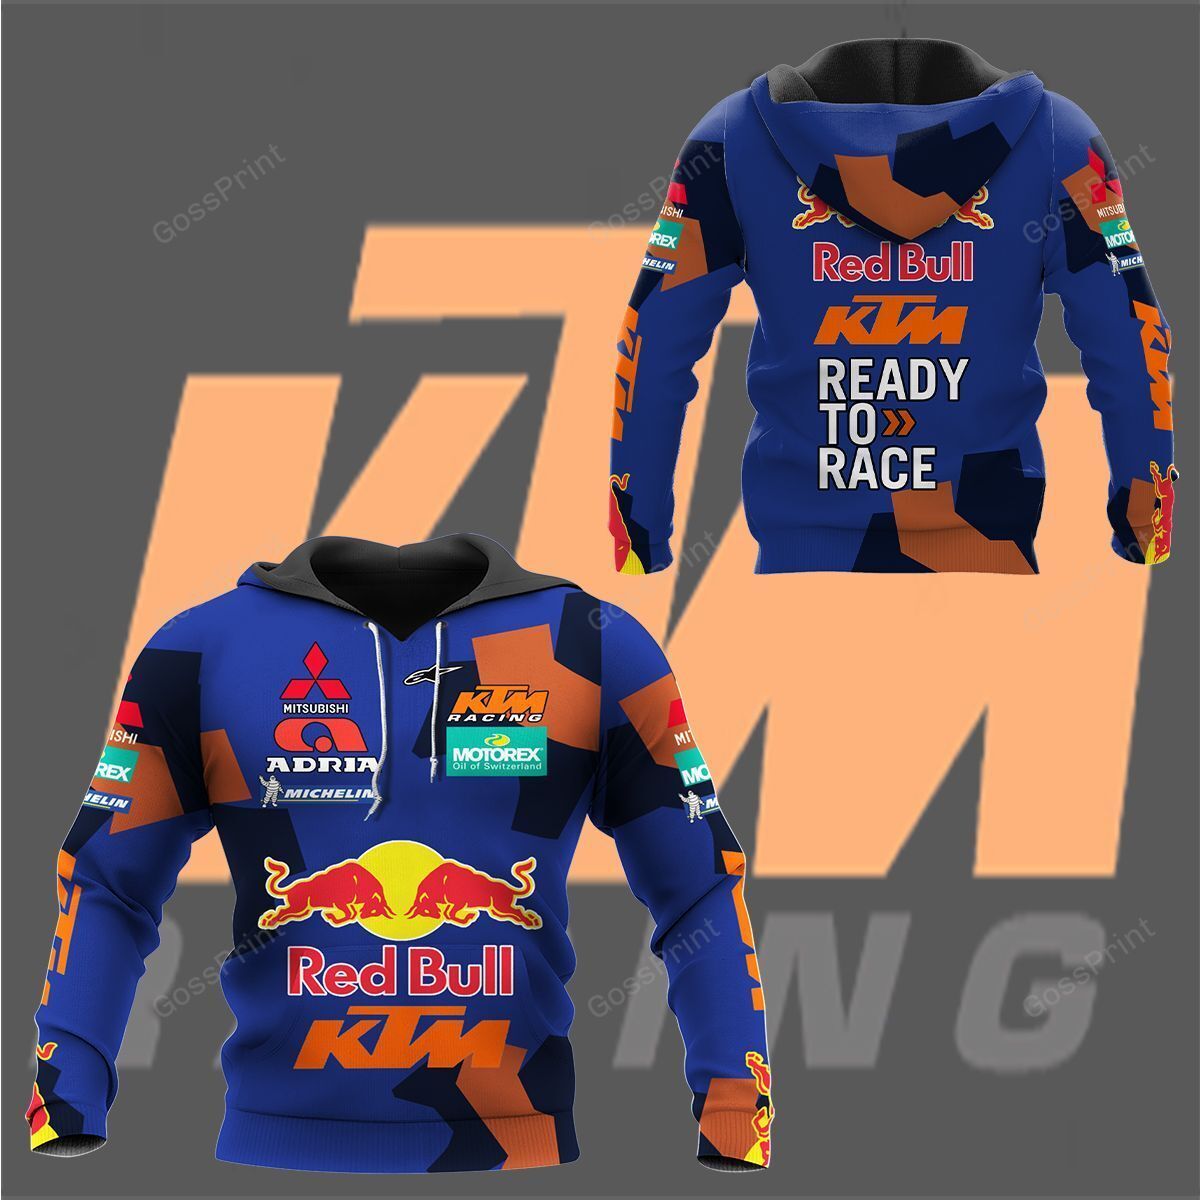 Shop now and get ready to make crazy up in style with top custom hoodie below! 80